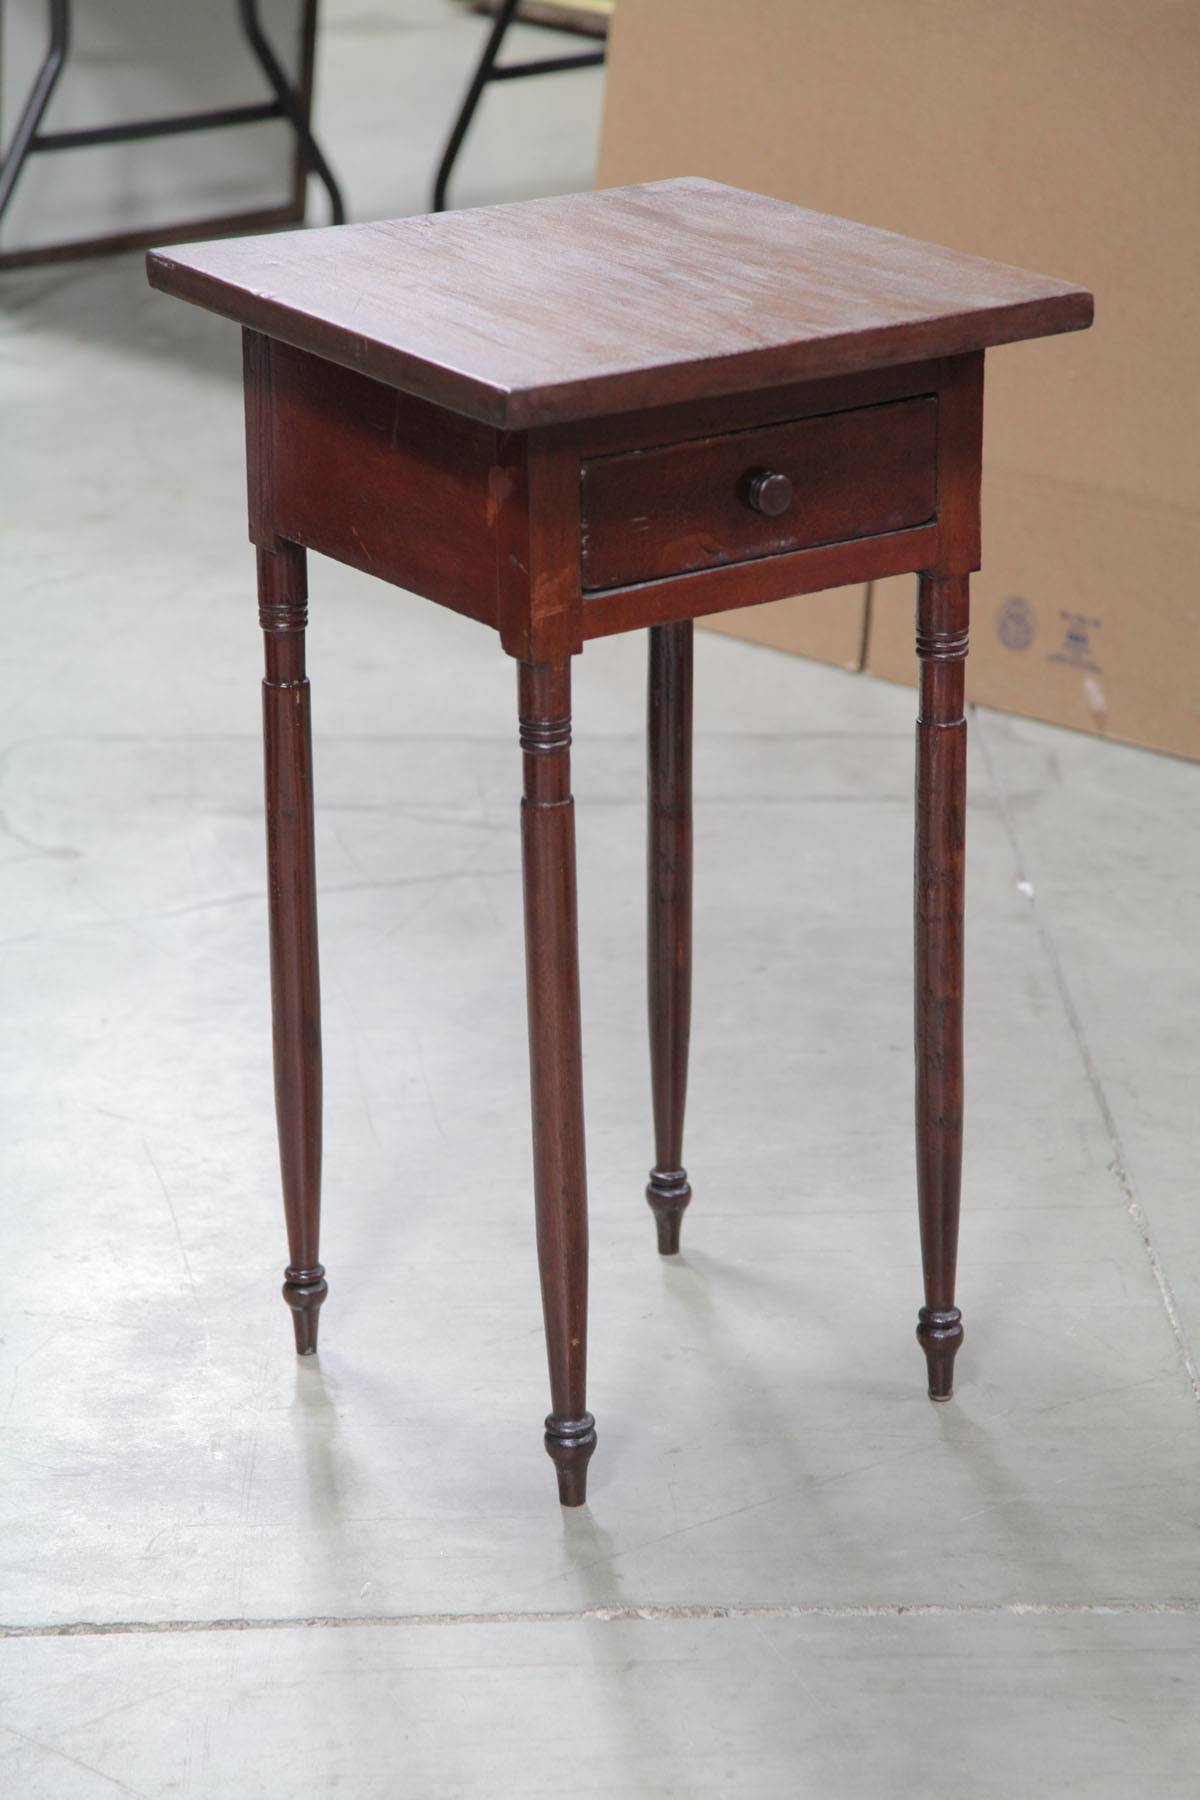 ONE DRAWER STAND.  American  mid 19th